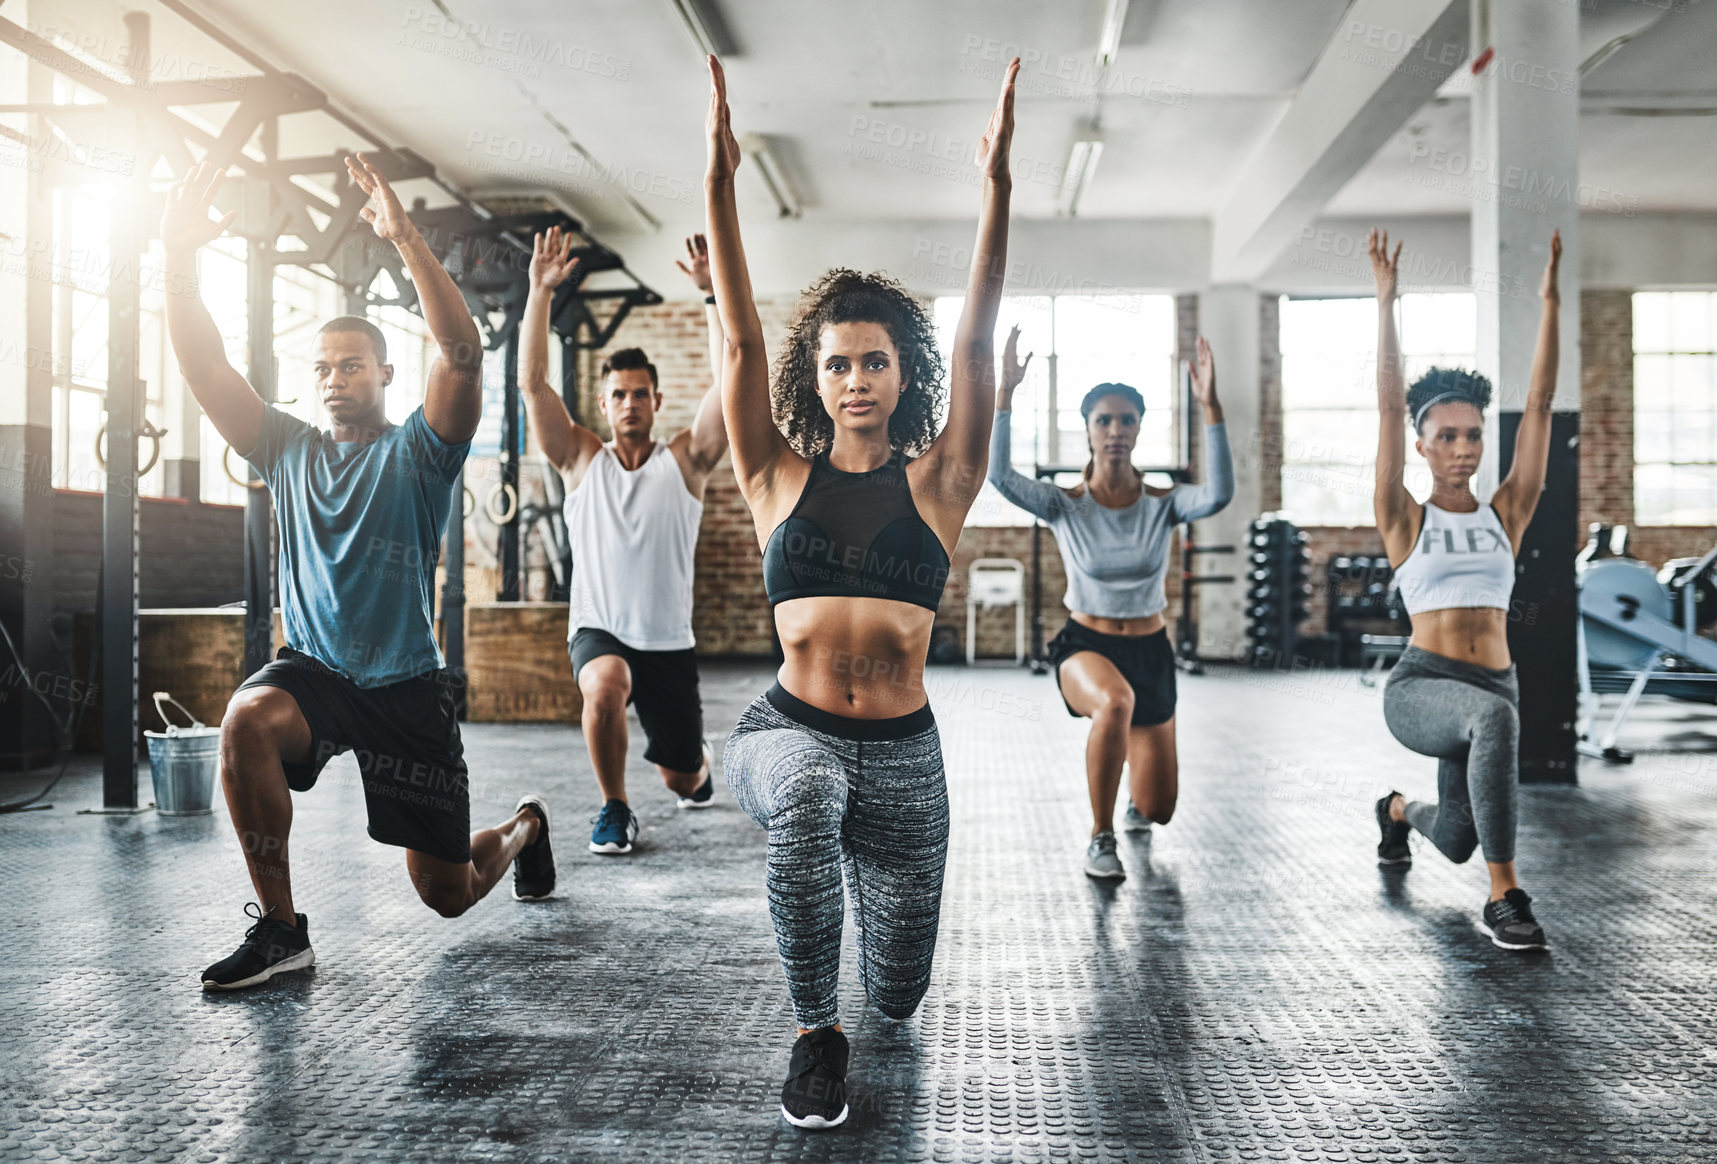 Buy stock photo Shot of a group of young people doing lunges together during their workout in a gym